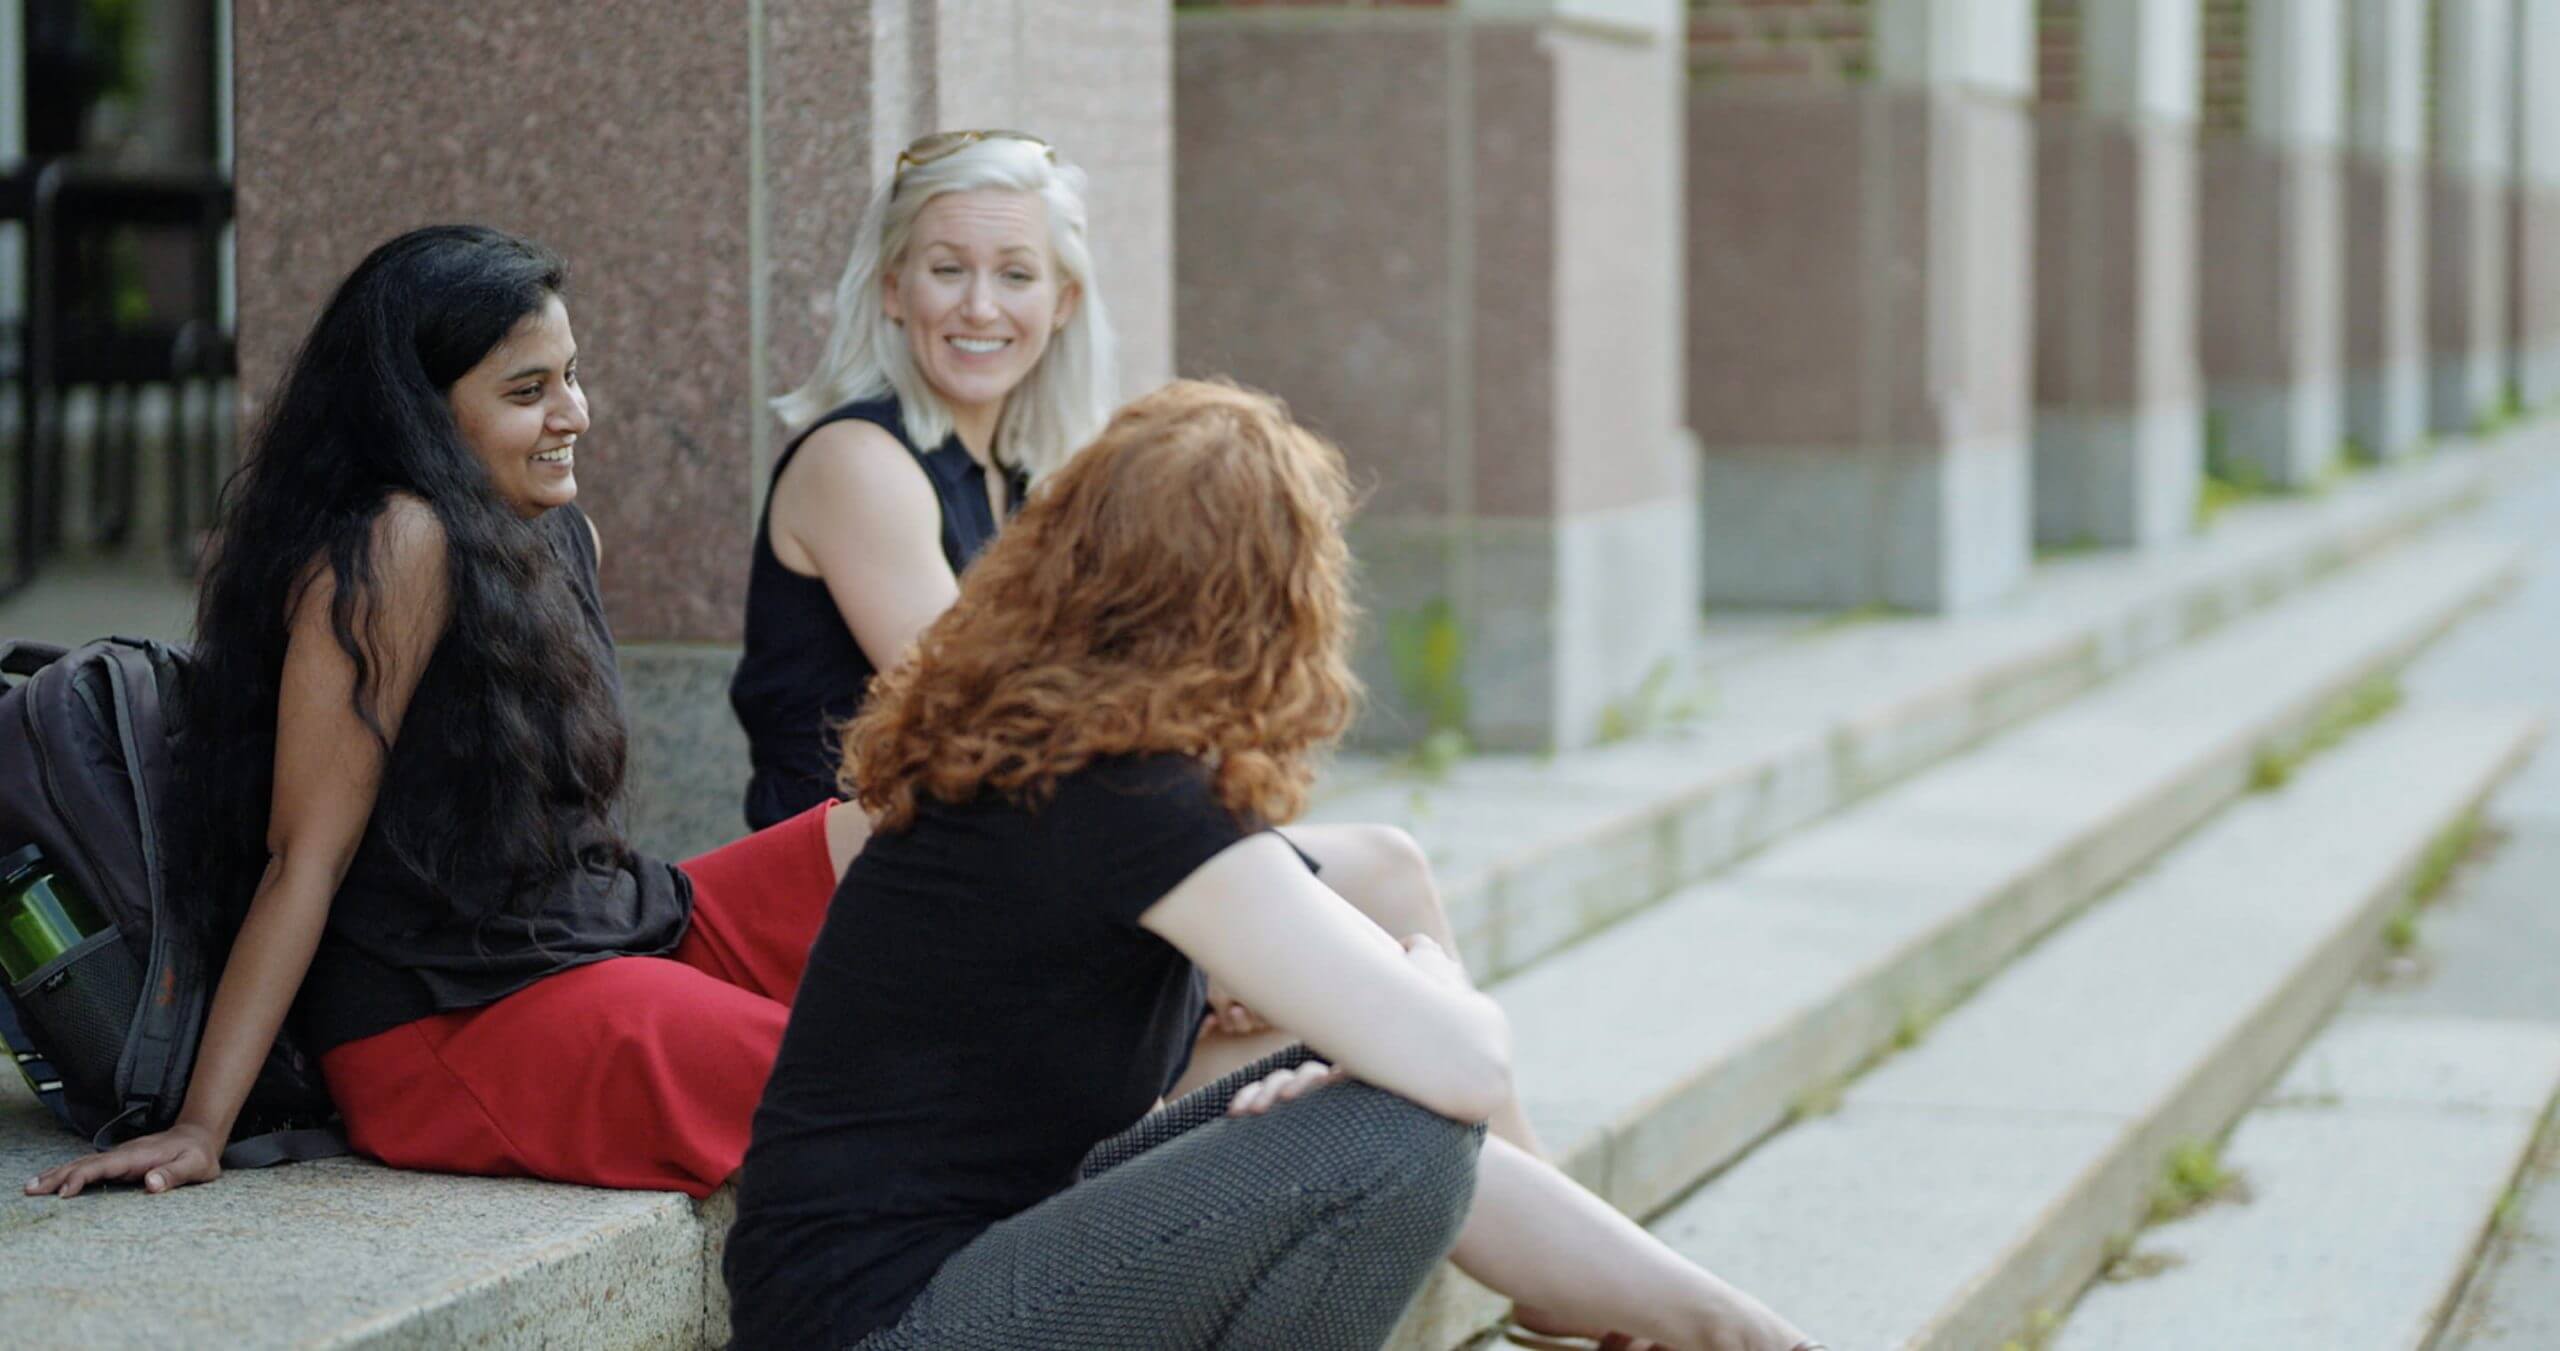 Three women sitting on the steps of a building are talking with each other. One of them, with red hair, gives her back to the camera to face one of the women.